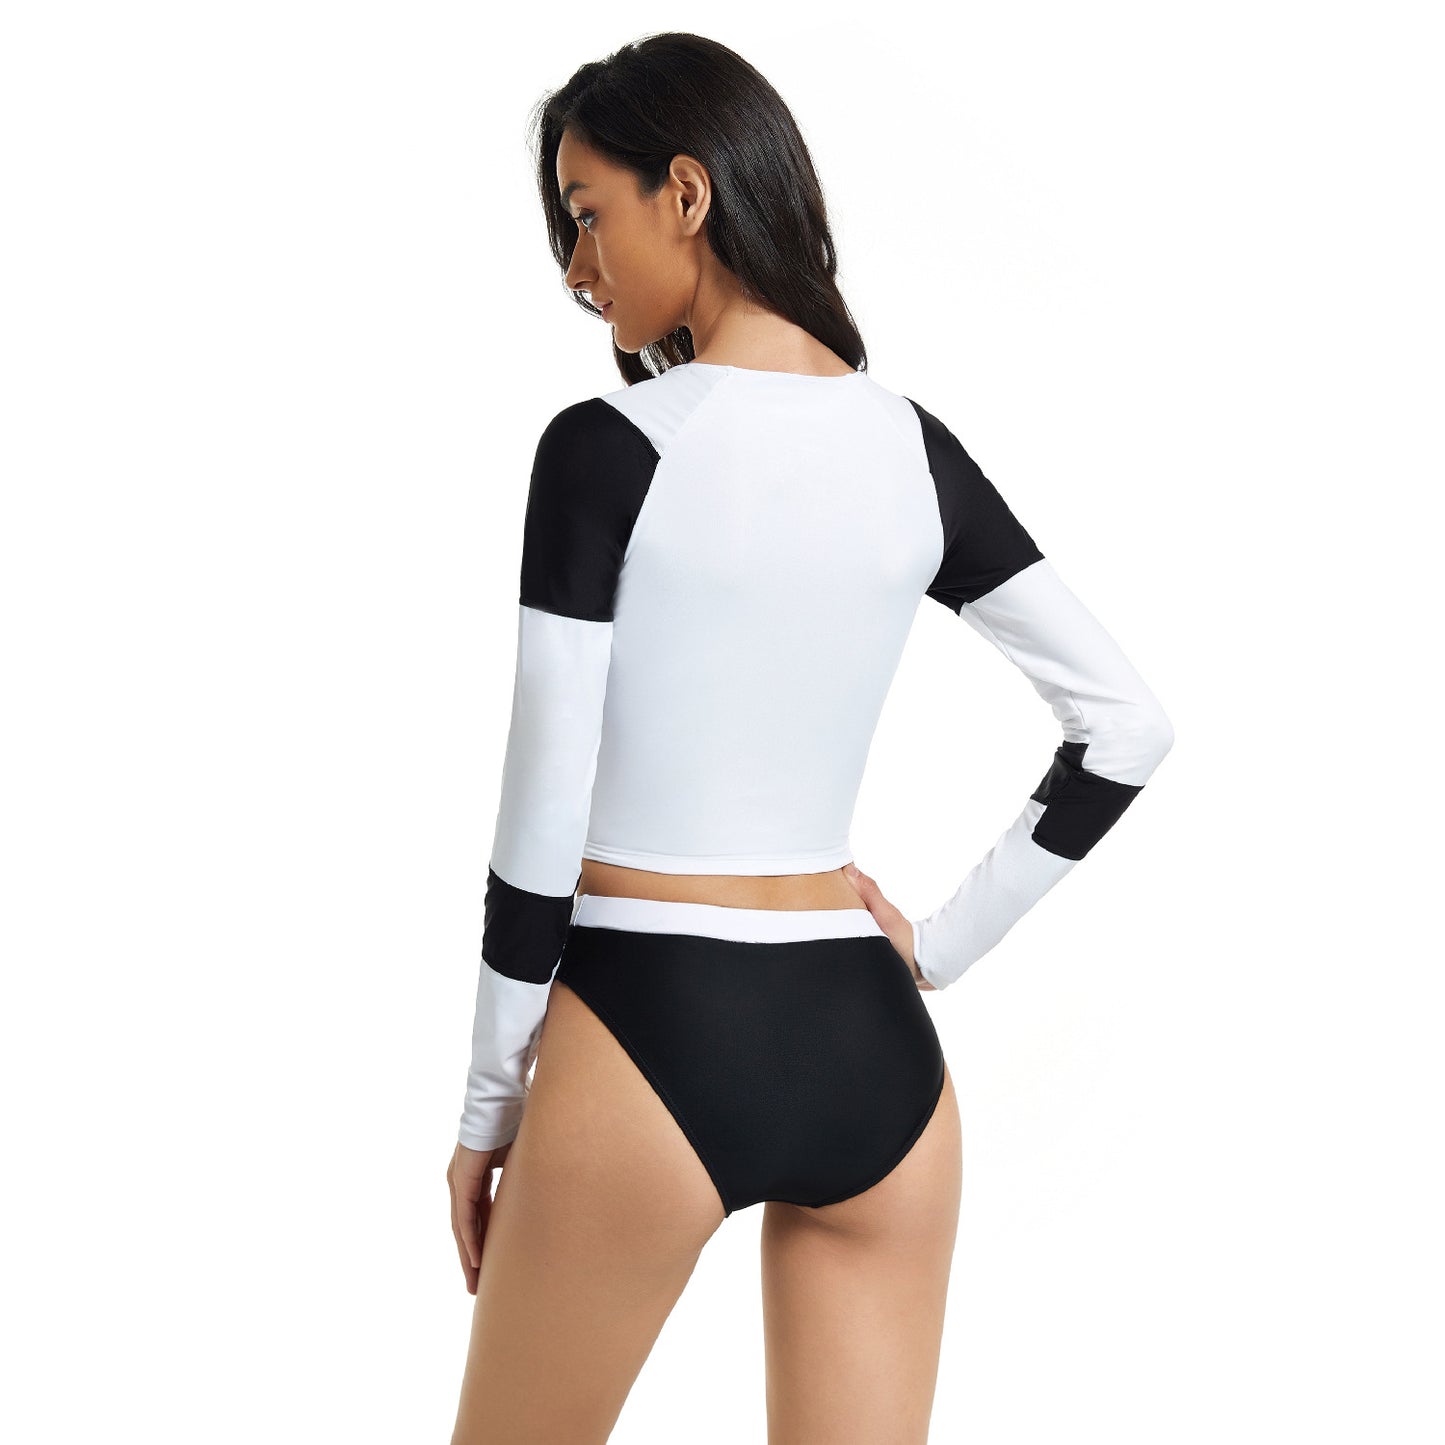 Black and Wihte Long Sleeves Surfing Wetsuits for Women